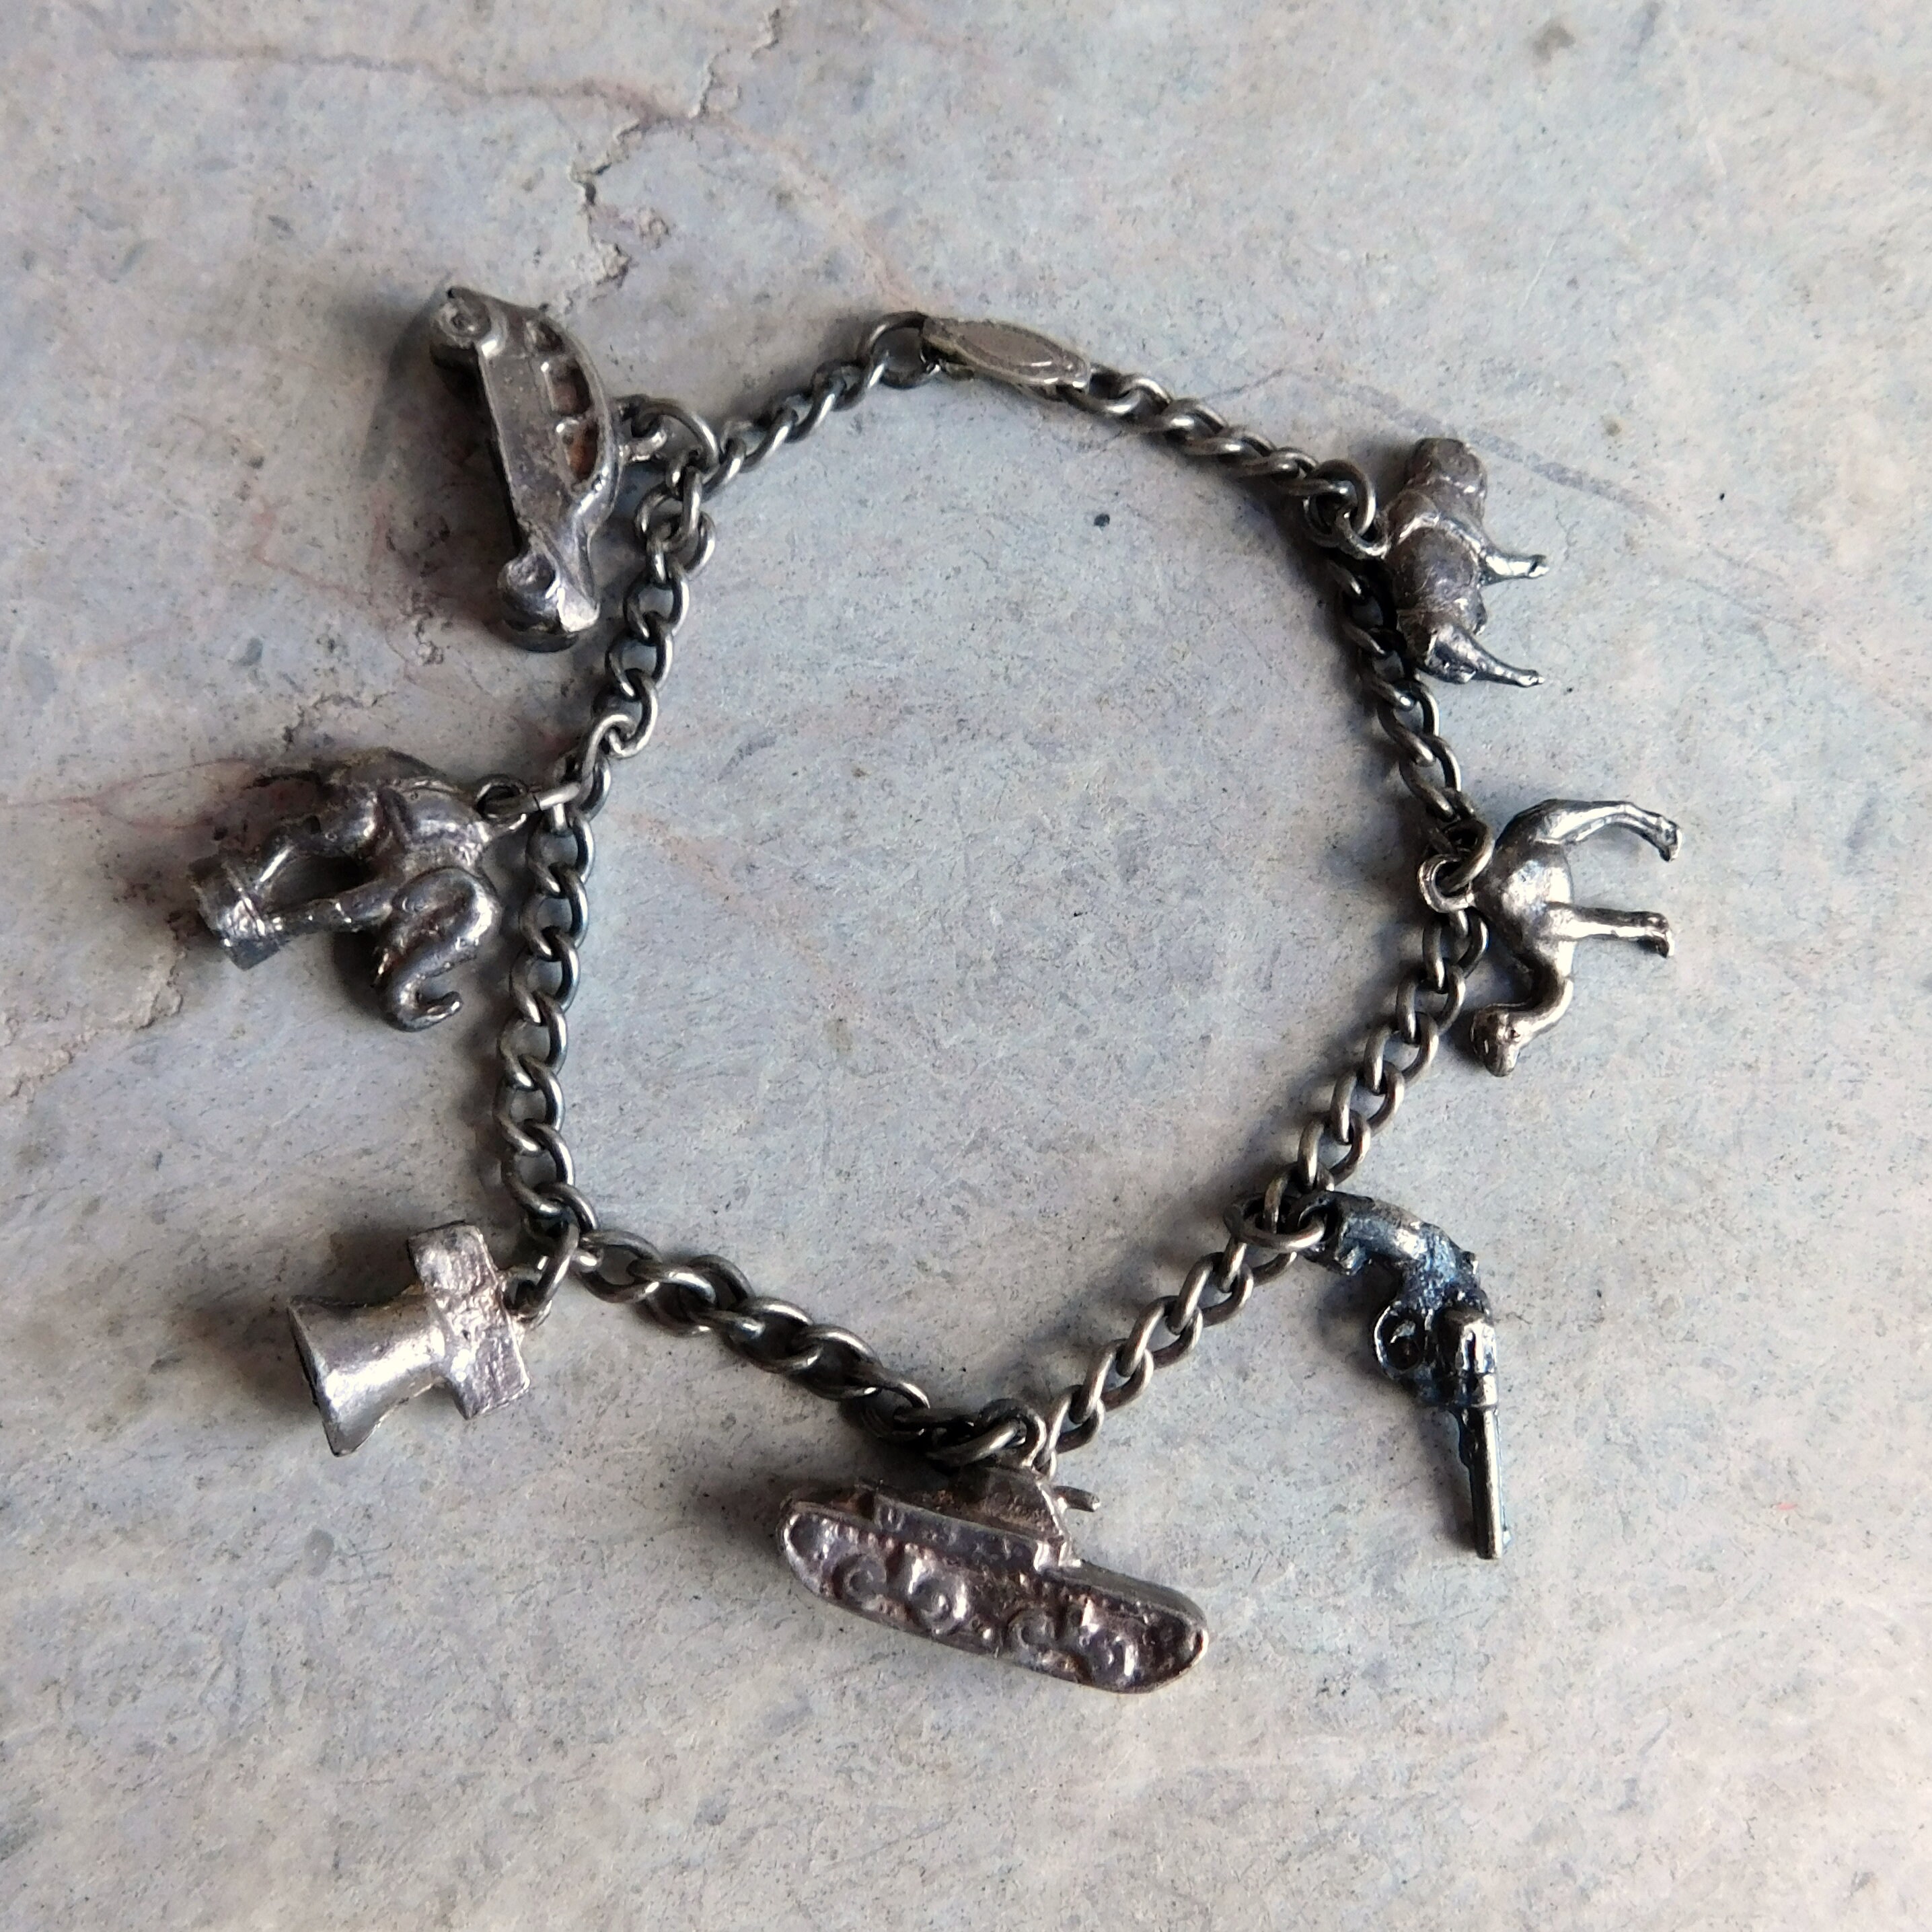 antique silver n gold sixshooter pistol concho charms bracelet